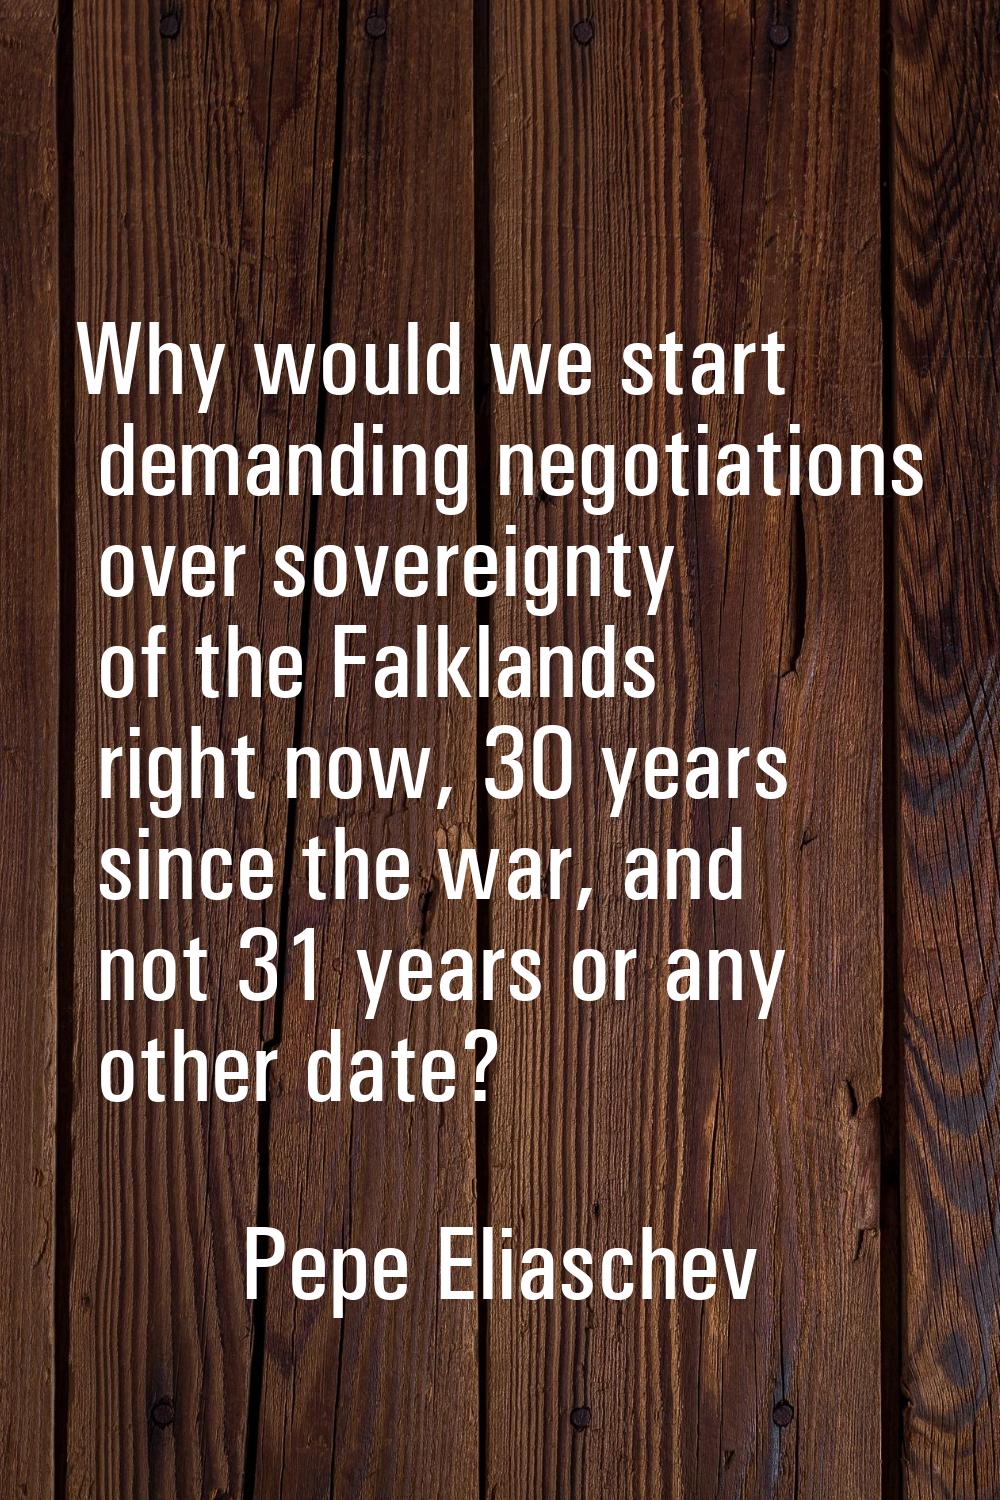 Why would we start demanding negotiations over sovereignty of the Falklands right now, 30 years sin